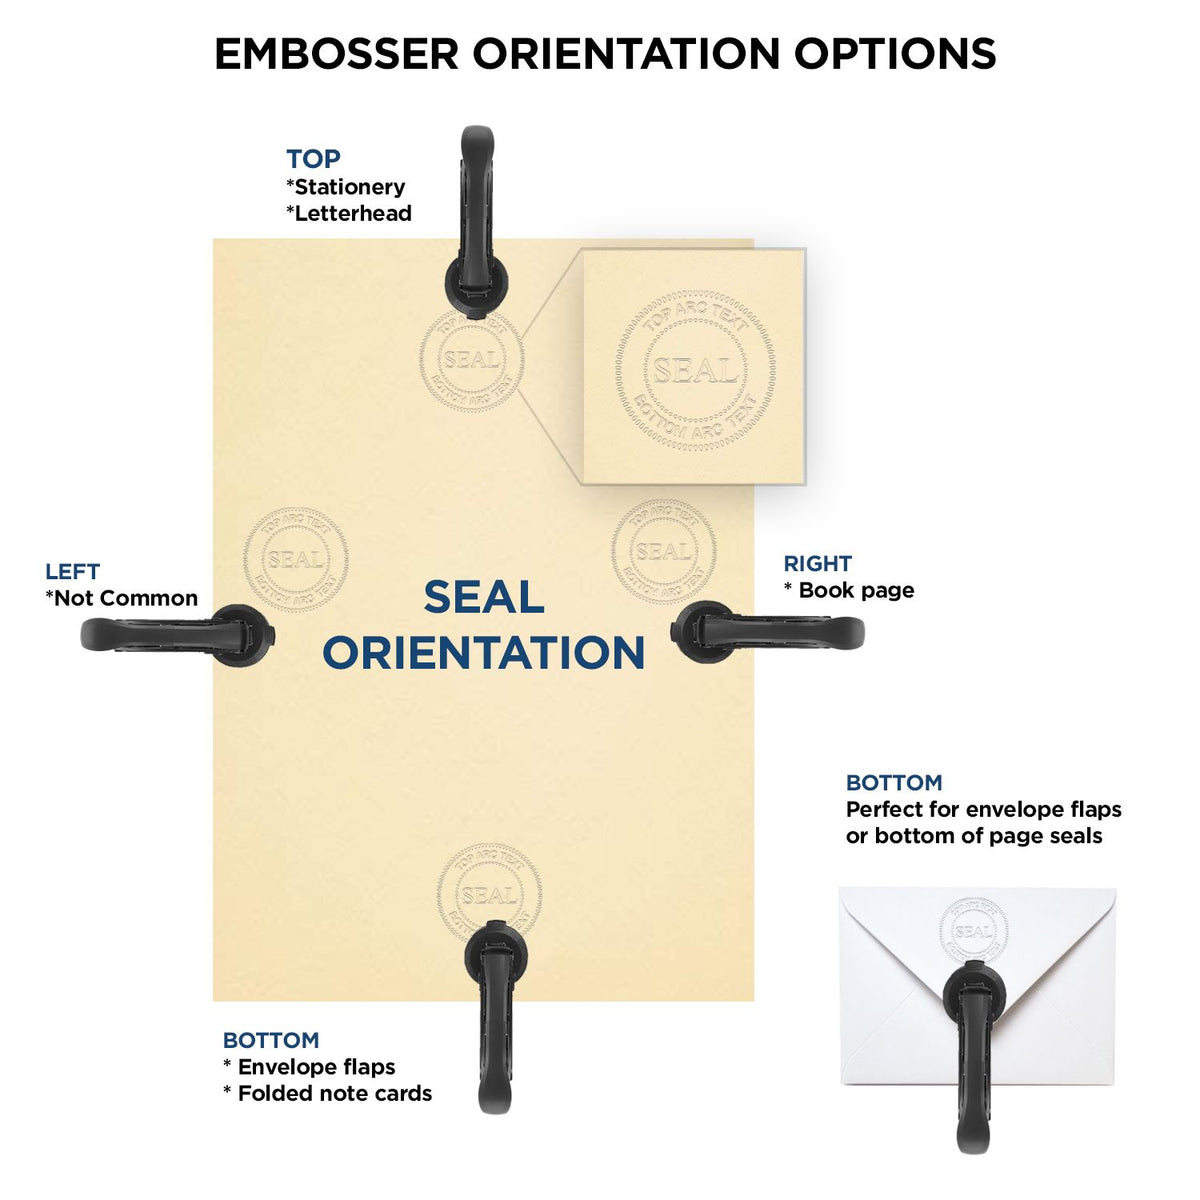 An infographic for the State of Minnesota Long Reach Architectural Embossing Seal showing embosser orientation, this is showing examples of a top, bottom, right and left insert.